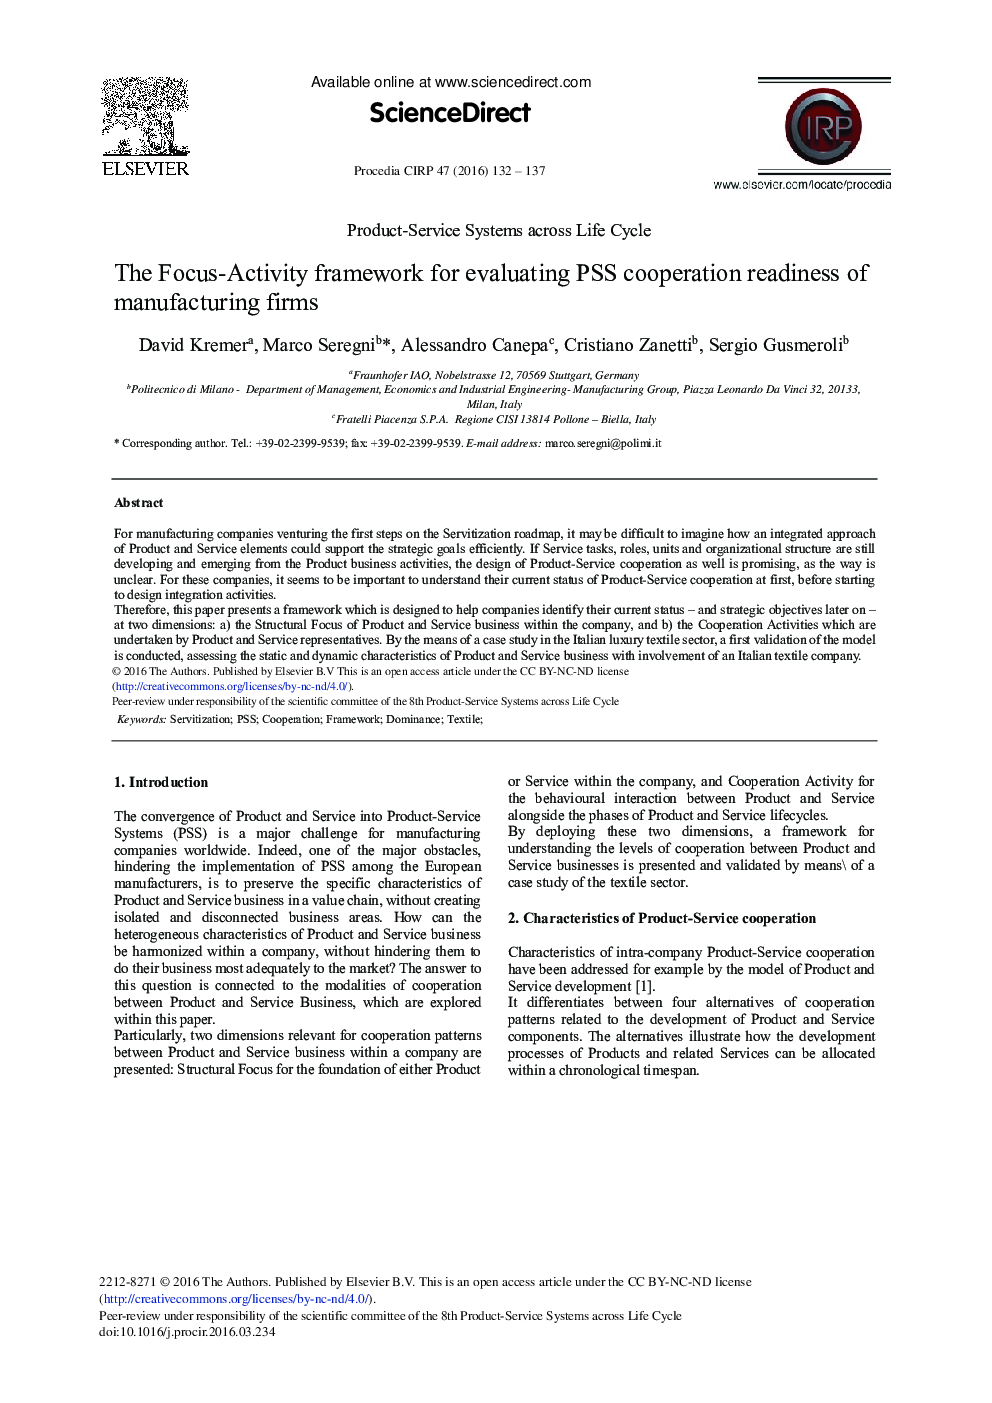 The Focus-activity Framework for Evaluating PSS Cooperation Readiness of Manufacturing Firms 